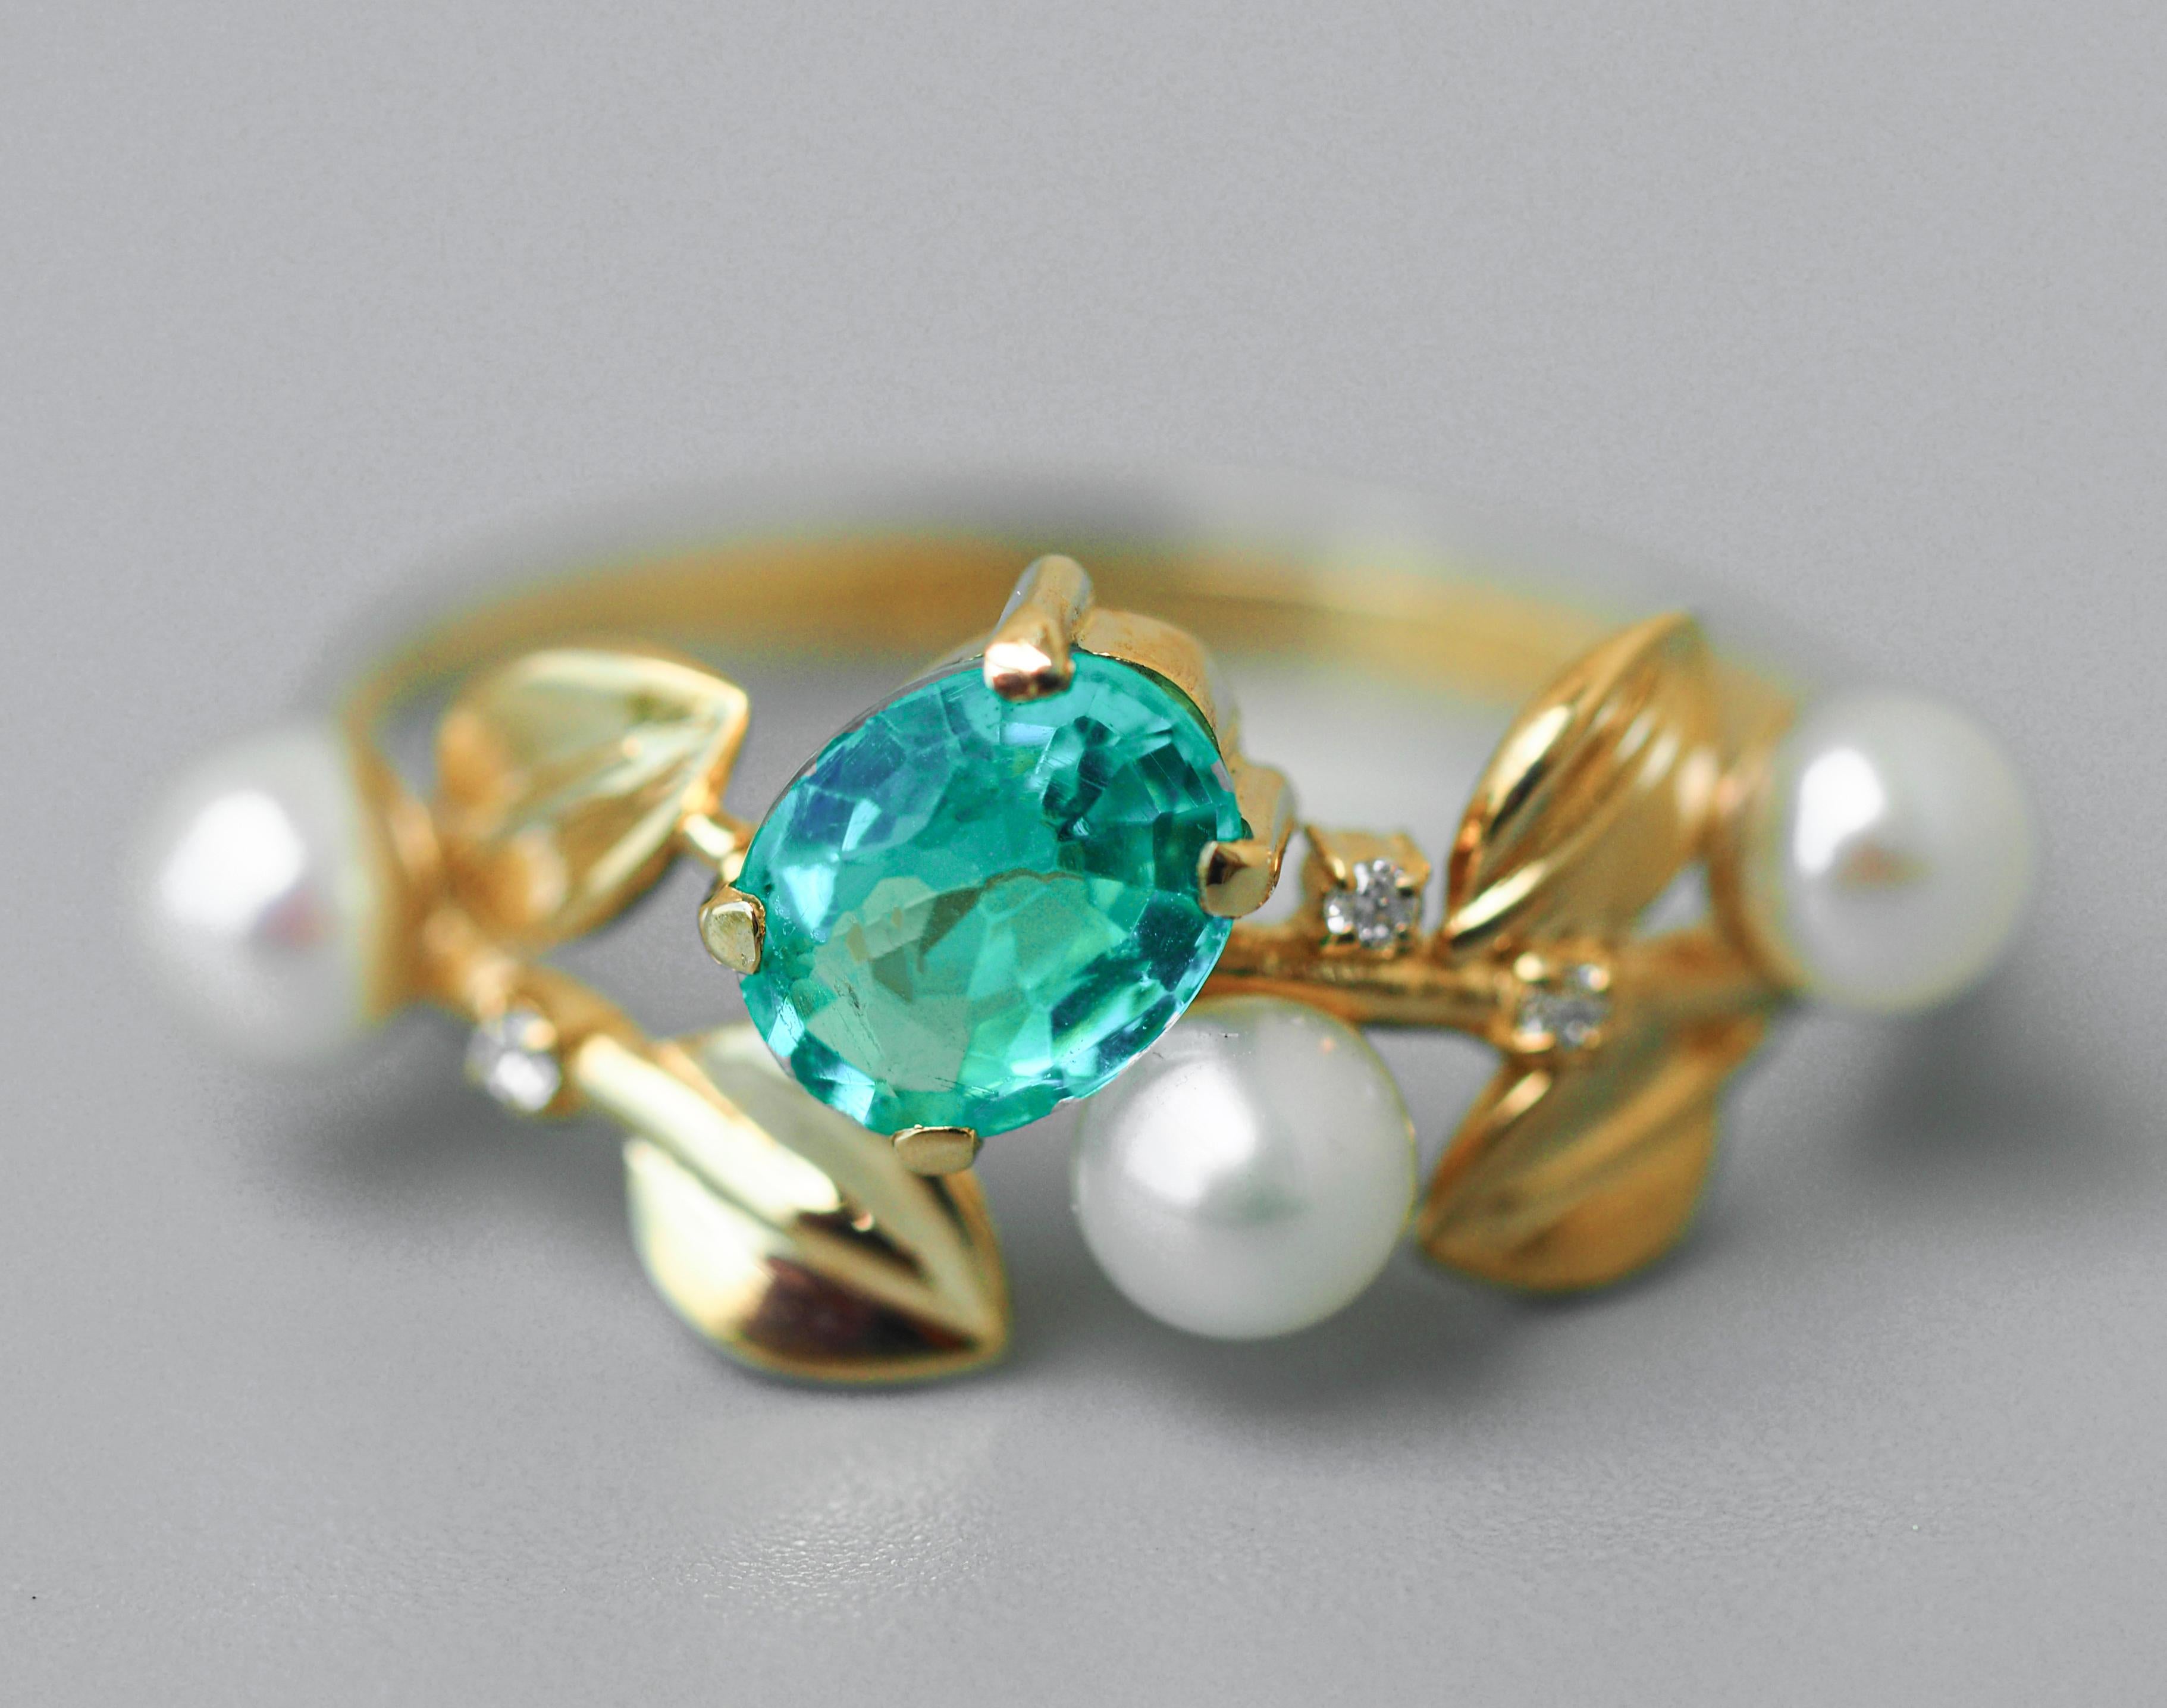 For Sale:  14k Gold Floral Ring with Oval Apatite, Diamonds and Pearls 7